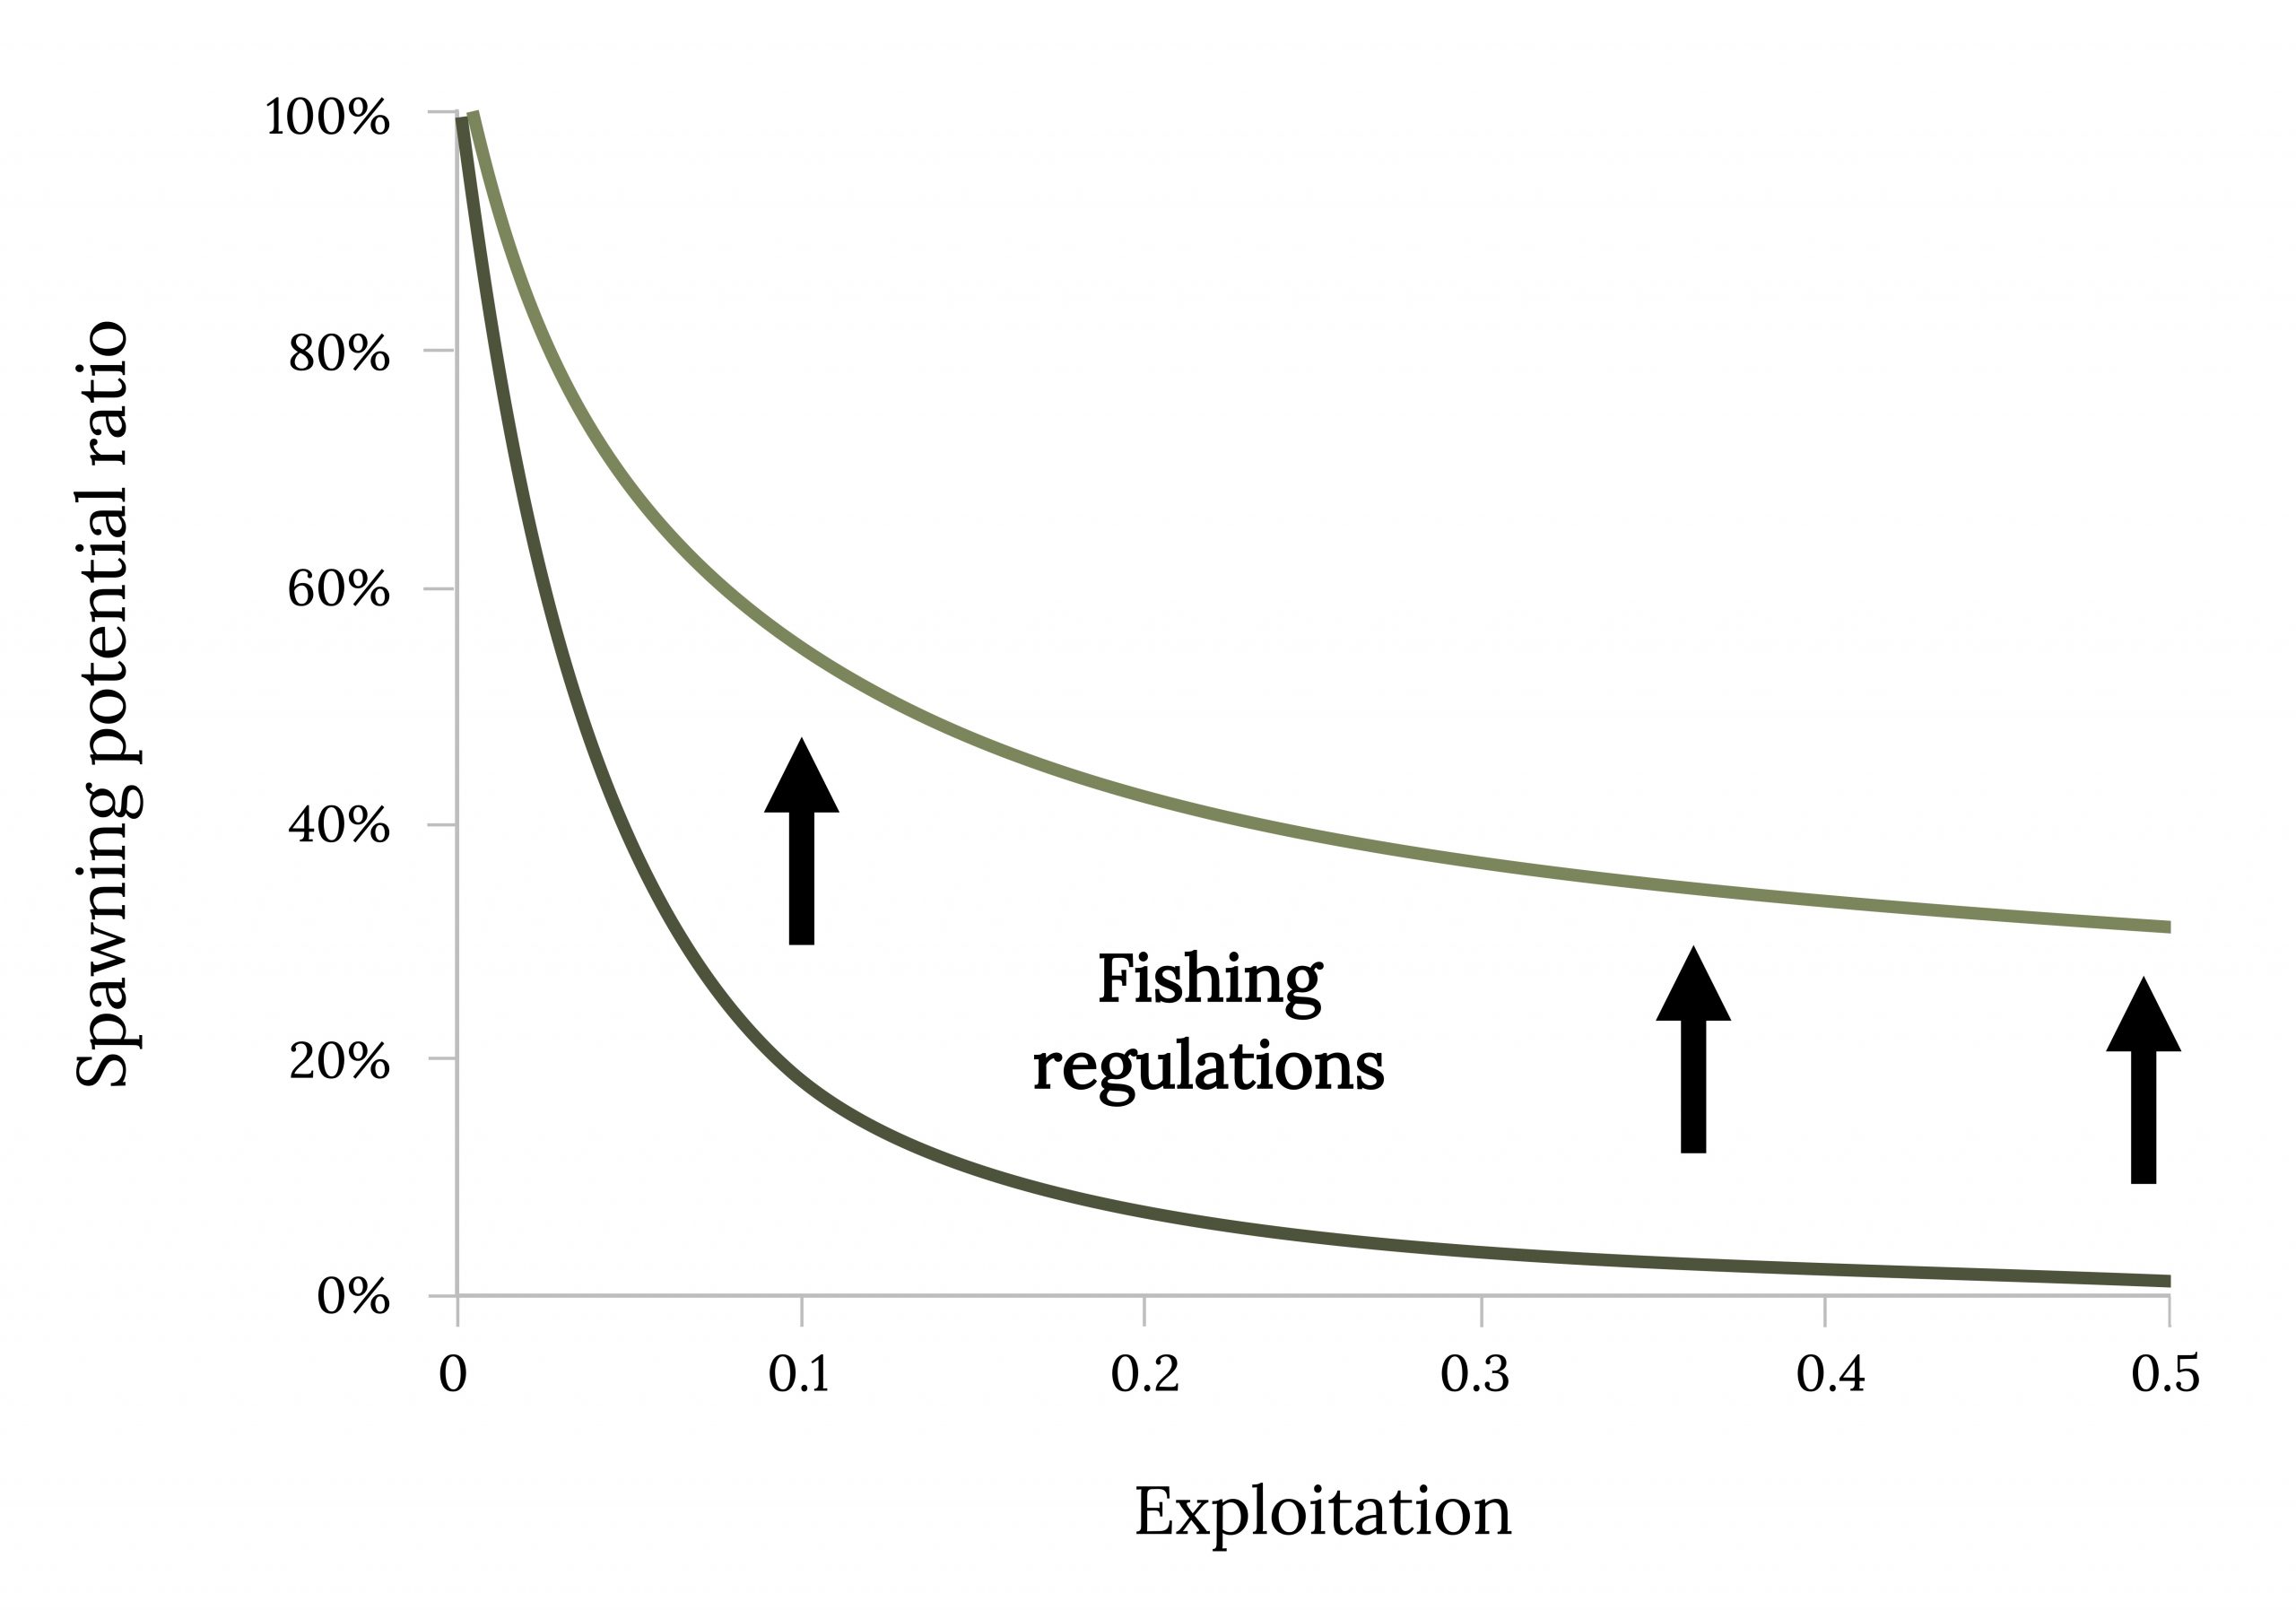 Decline in spawning potential ratio with exploitation and fishing regulations